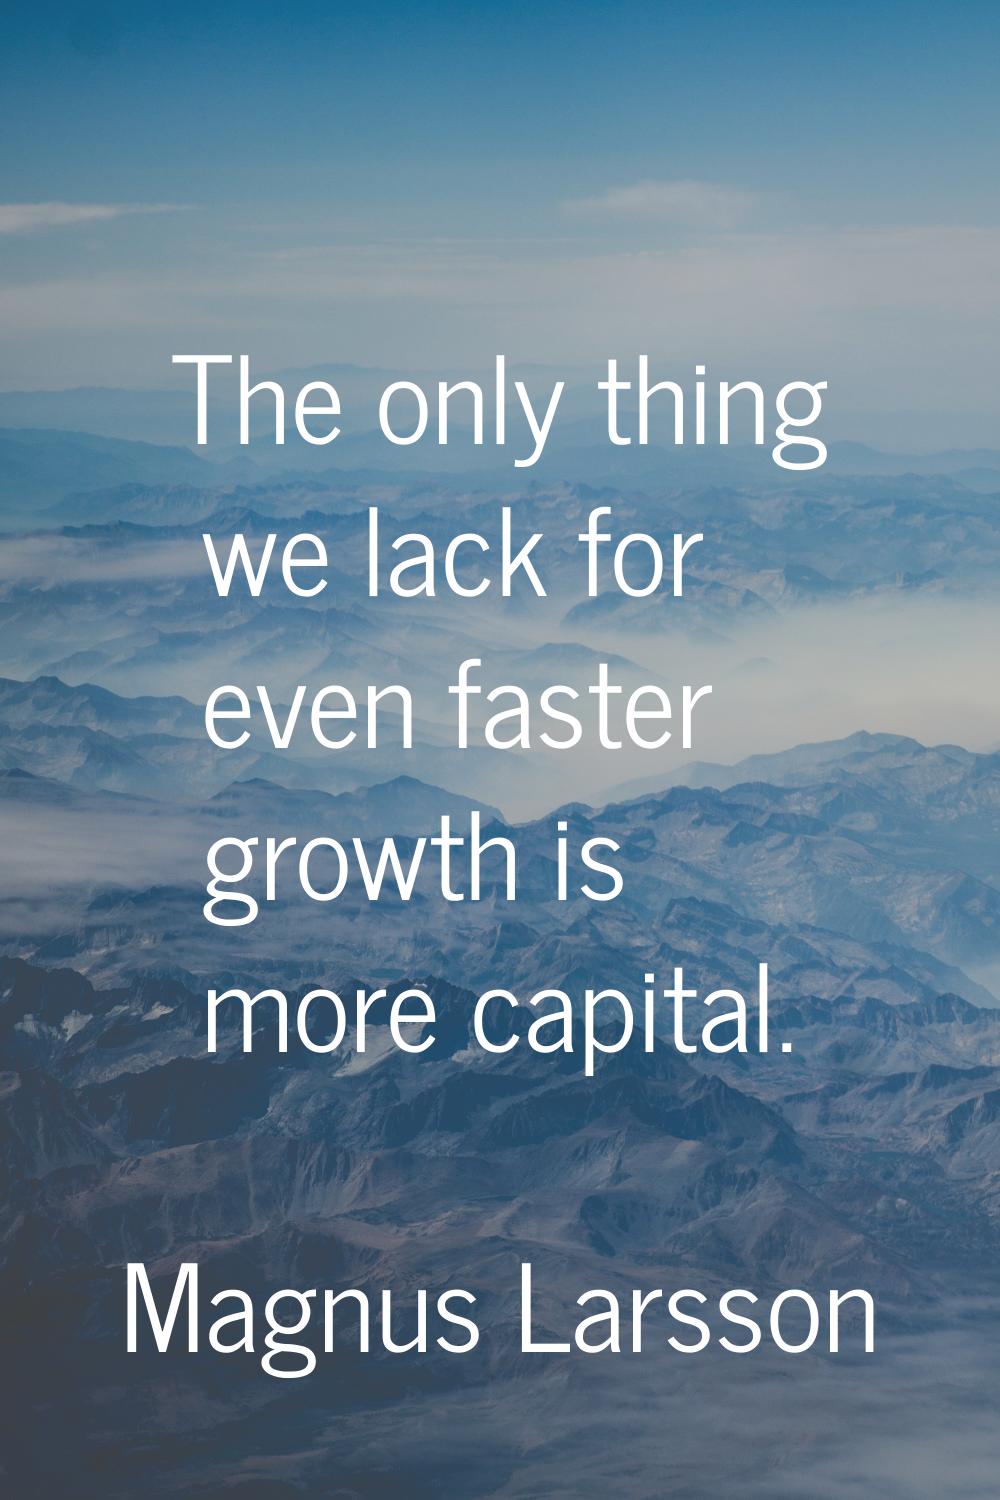 The only thing we lack for even faster growth is more capital.